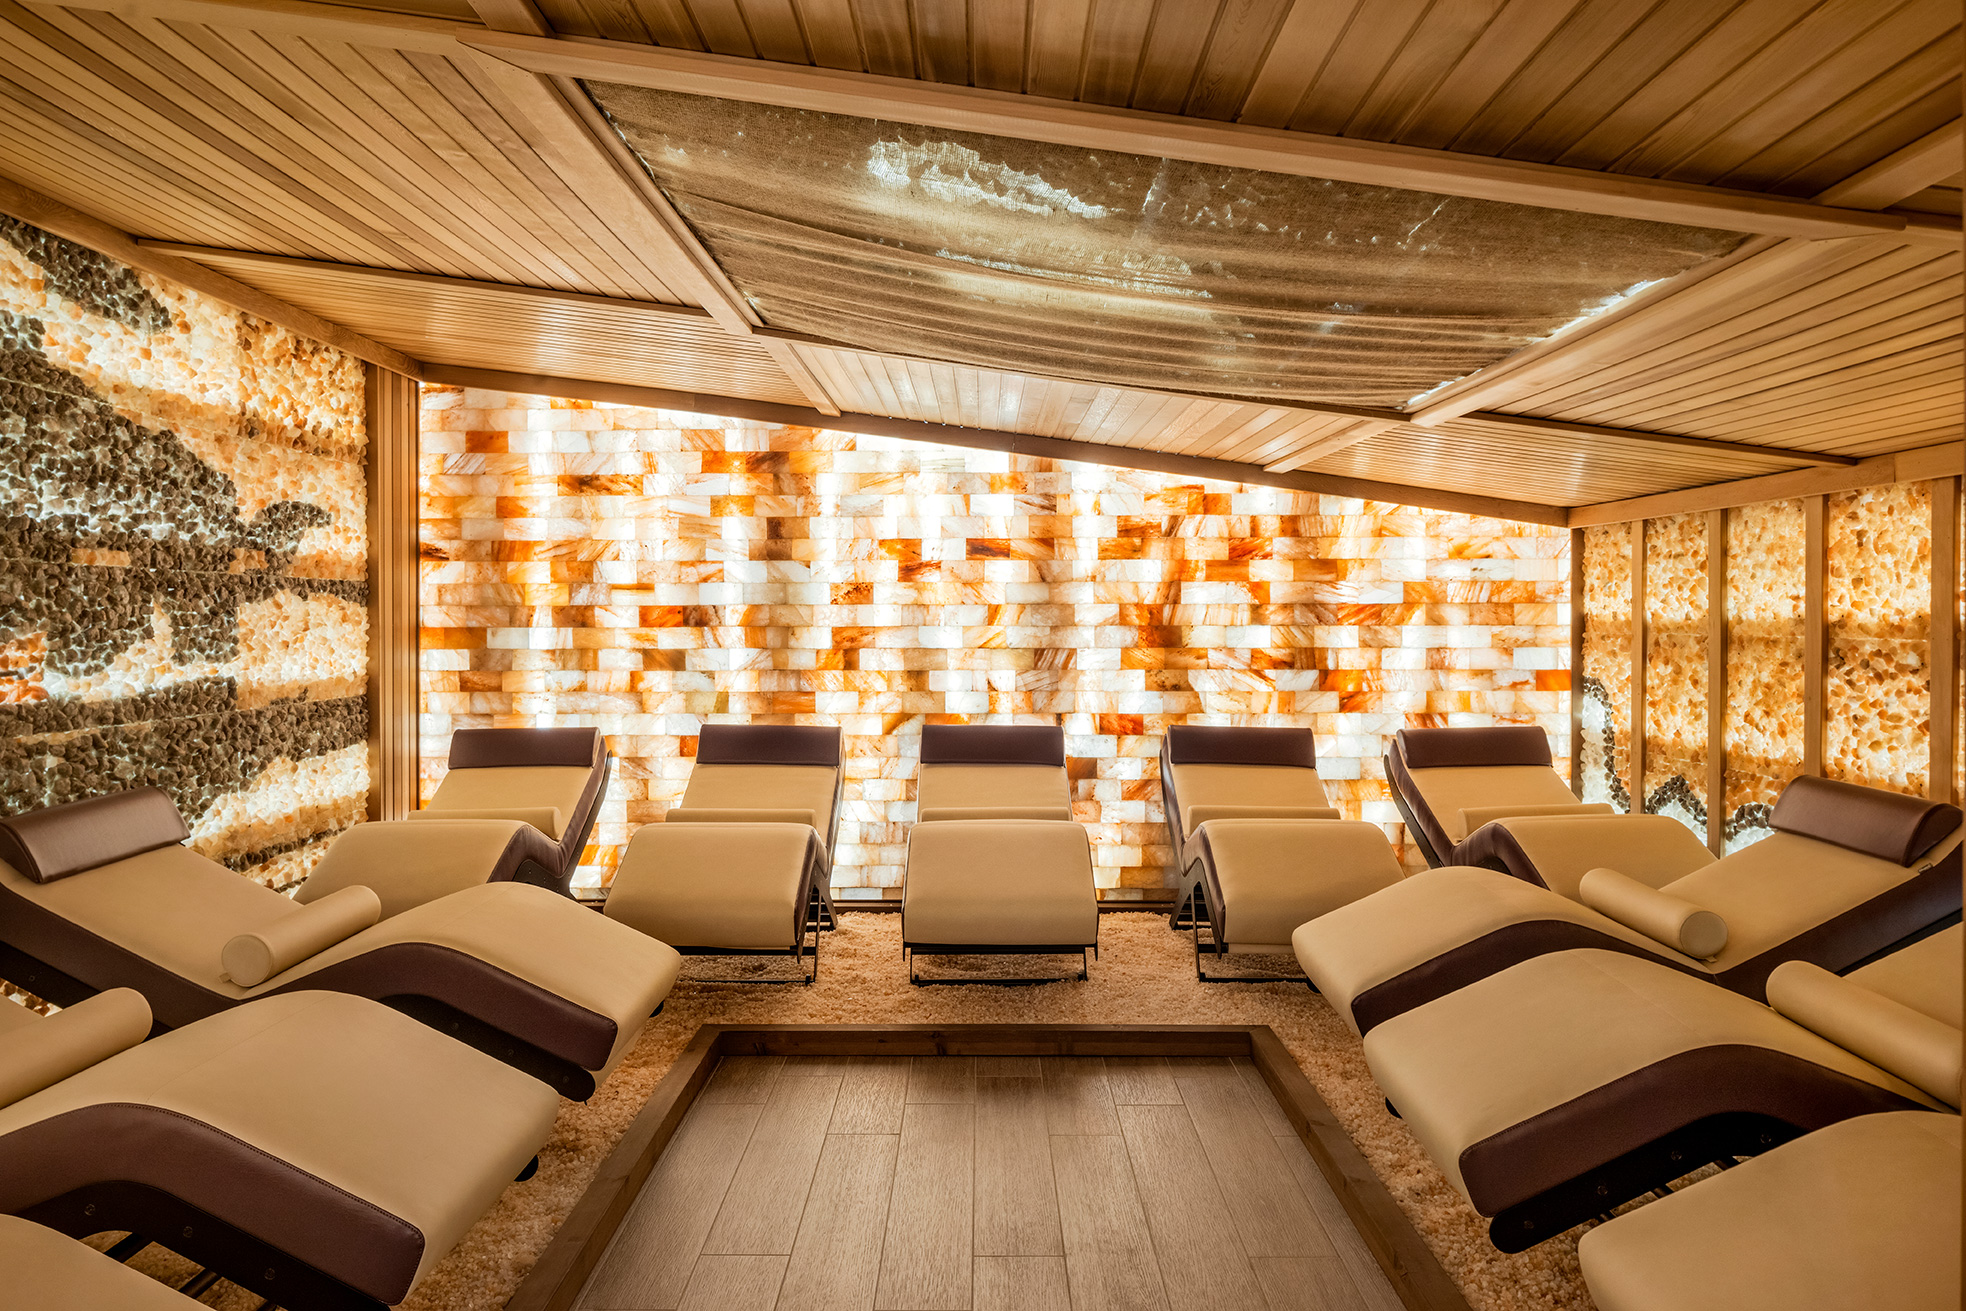 A Himalayan salt room with multiple reclining spa loungers arranged neatly. The room features warm lighting, walls adorned with illuminated salt crystals, and a ceiling with wooden beams, creating a serene and peaceful atmosphere.